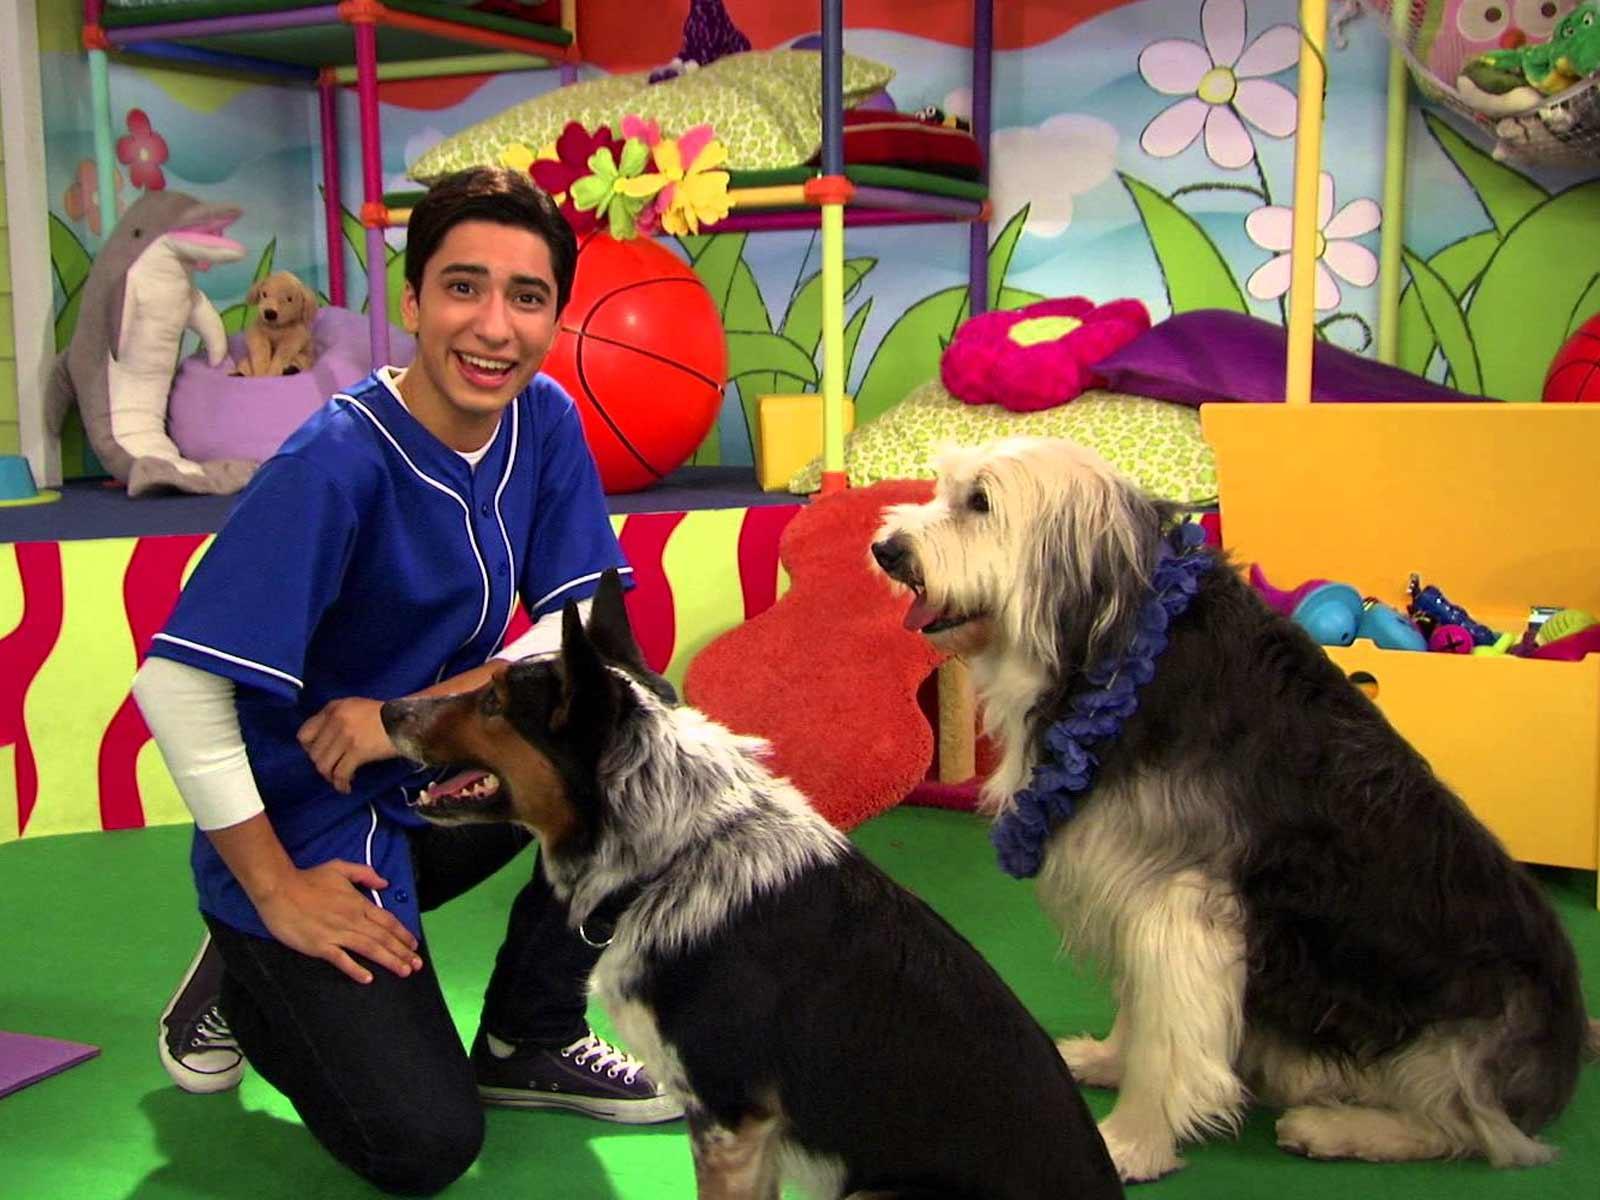 Animals Trainers Sue Over Talent Dogfight on Nickelodeon’s ‘Mutt & Stuff’